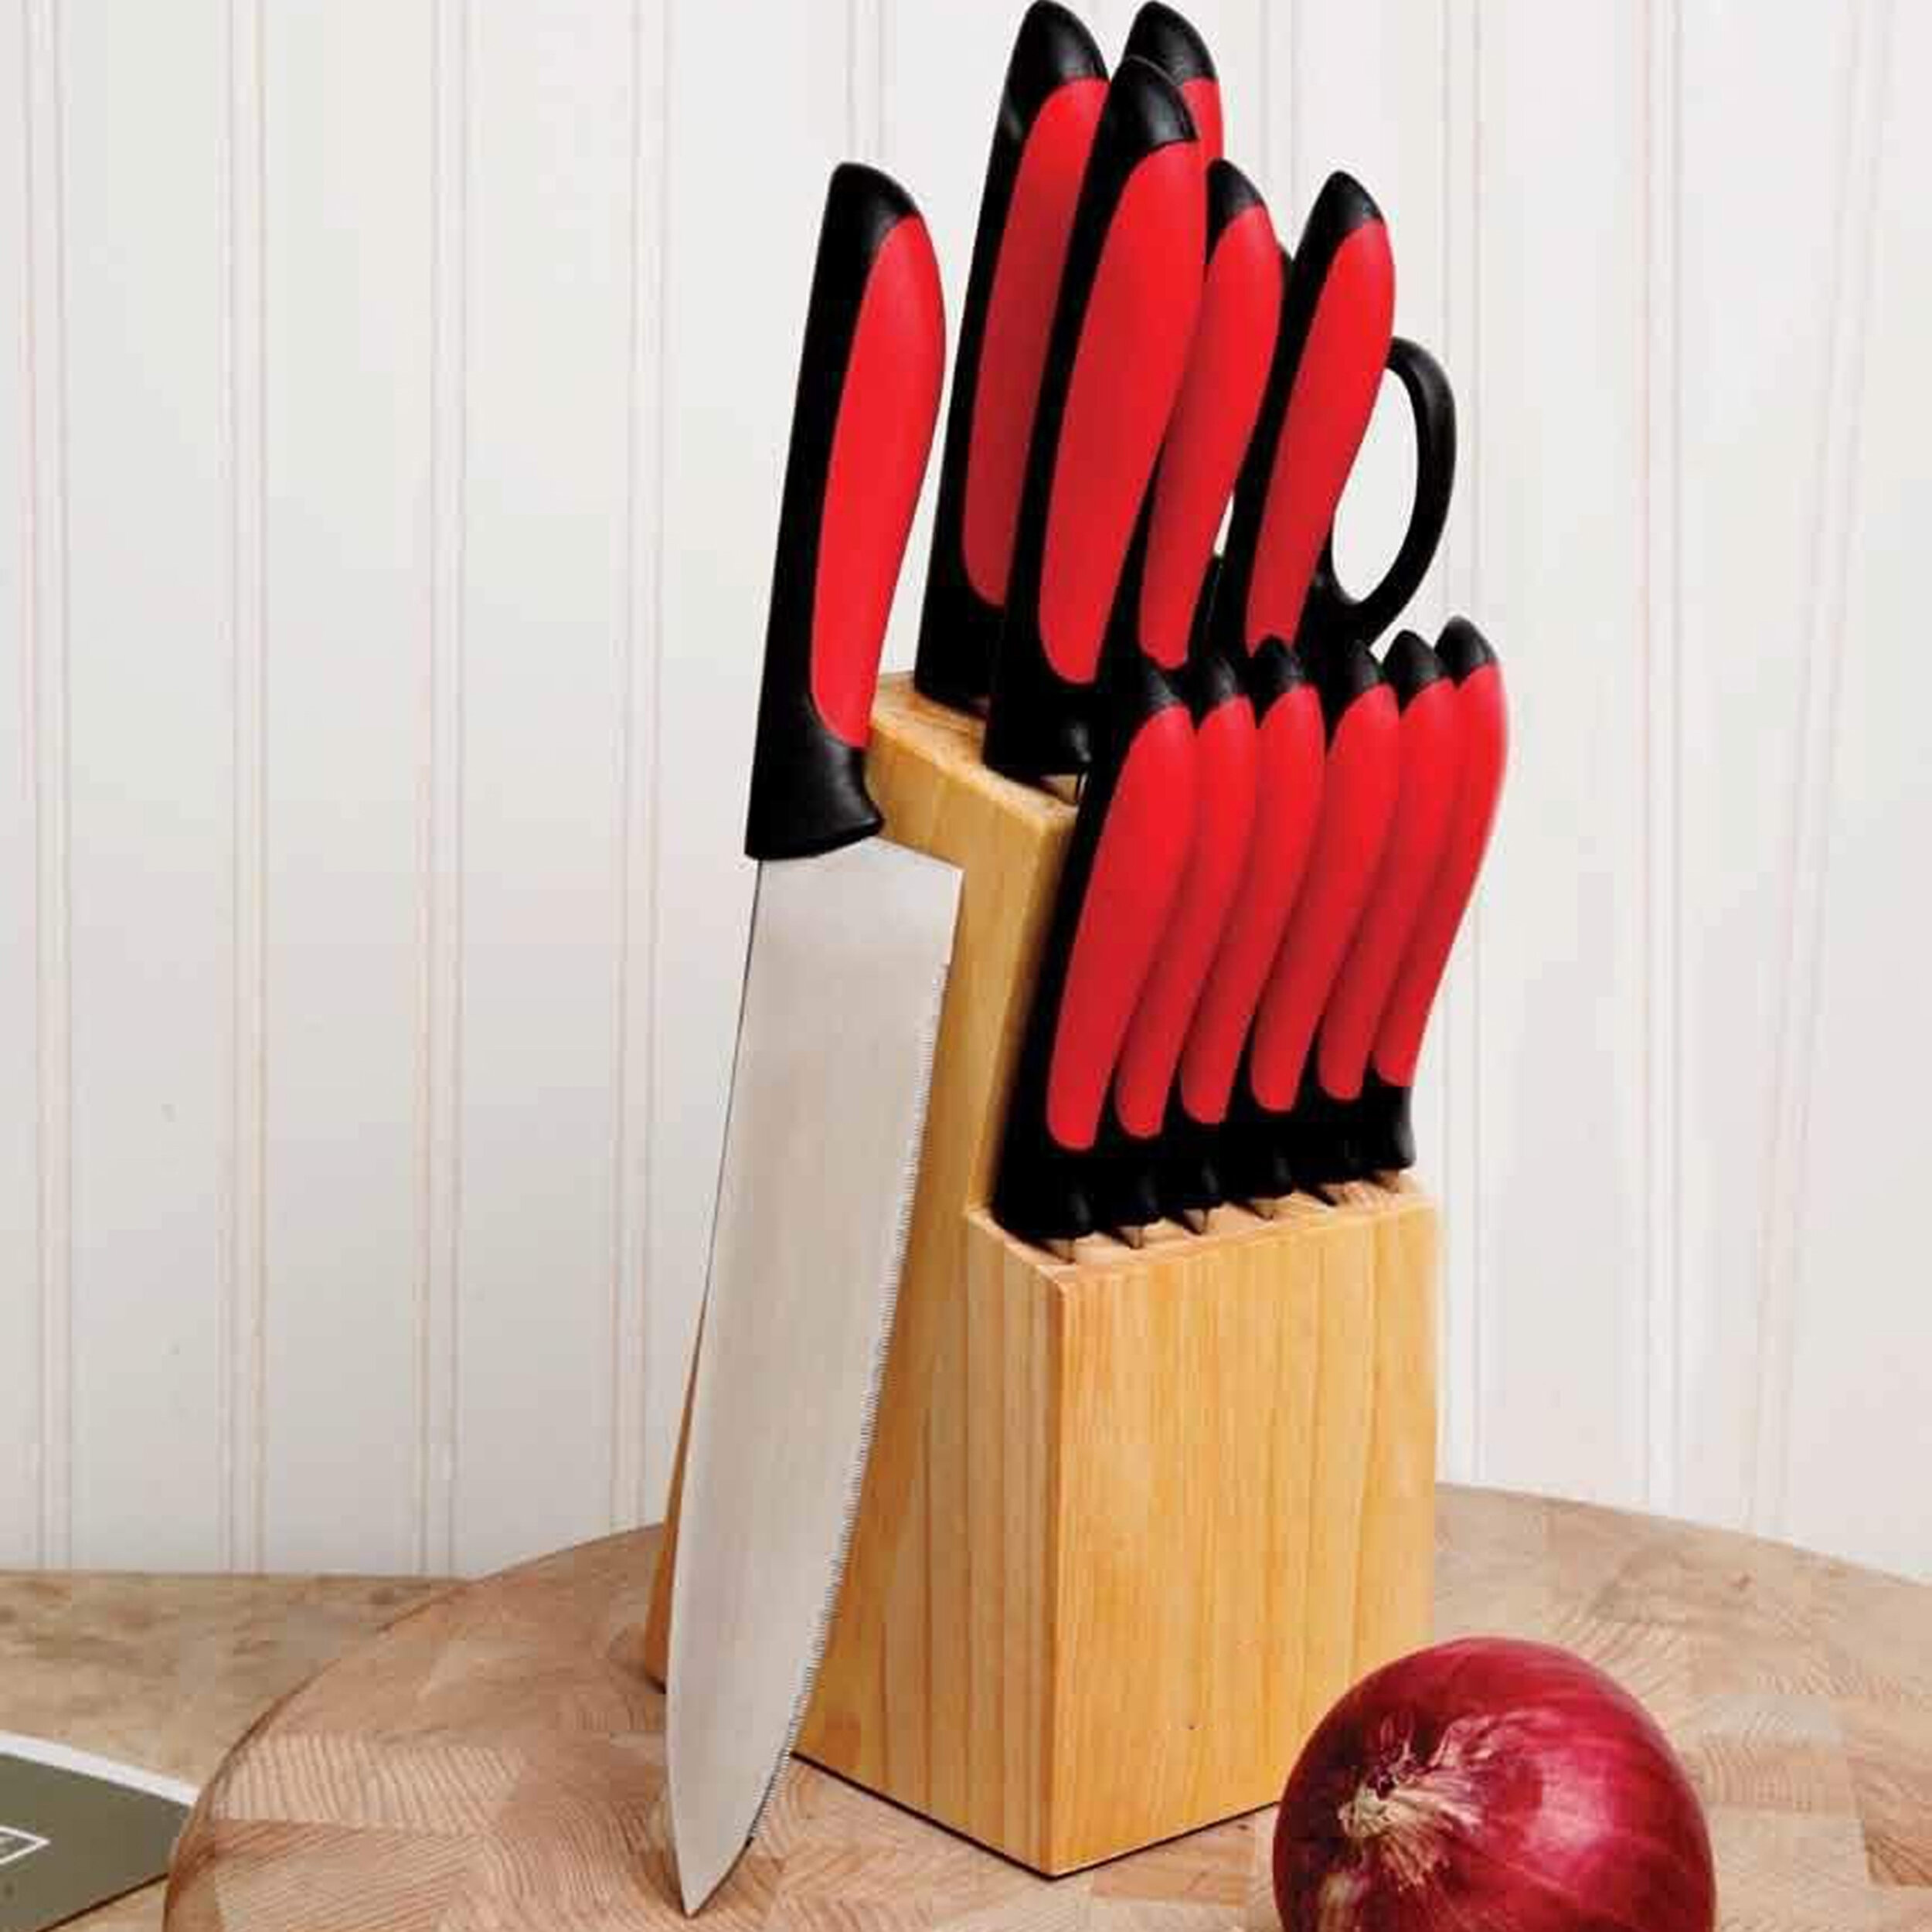 Cheer Collection 14 Piece Stainless Steel (18/0) Assorted Knife Set